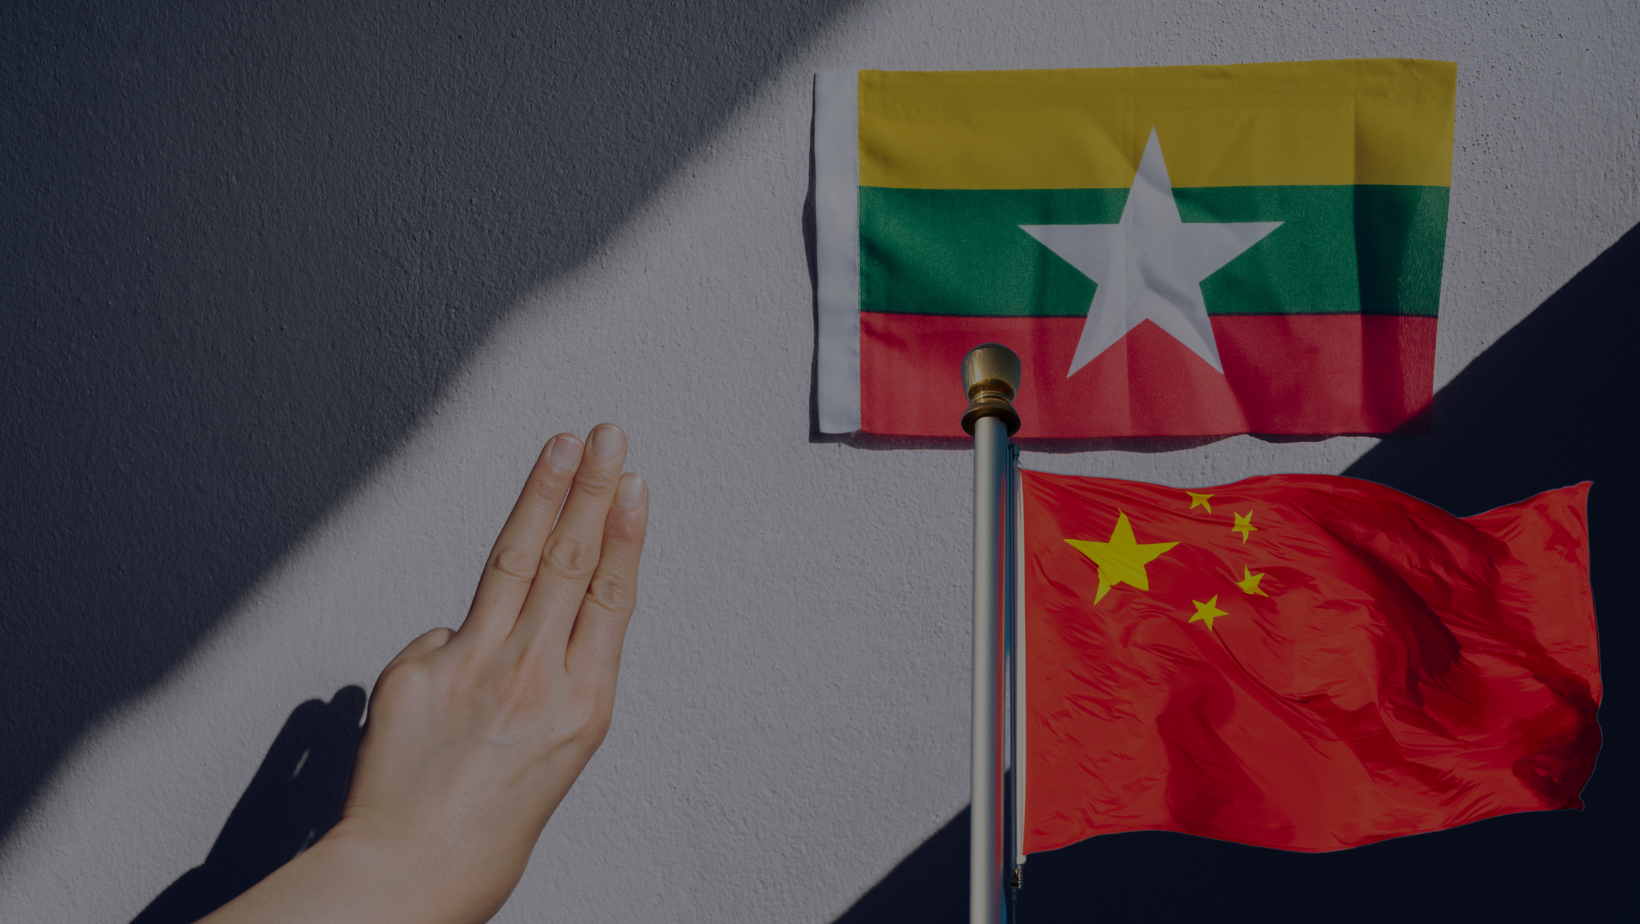 China’s stance towards Myanmar following the 2021 military coup